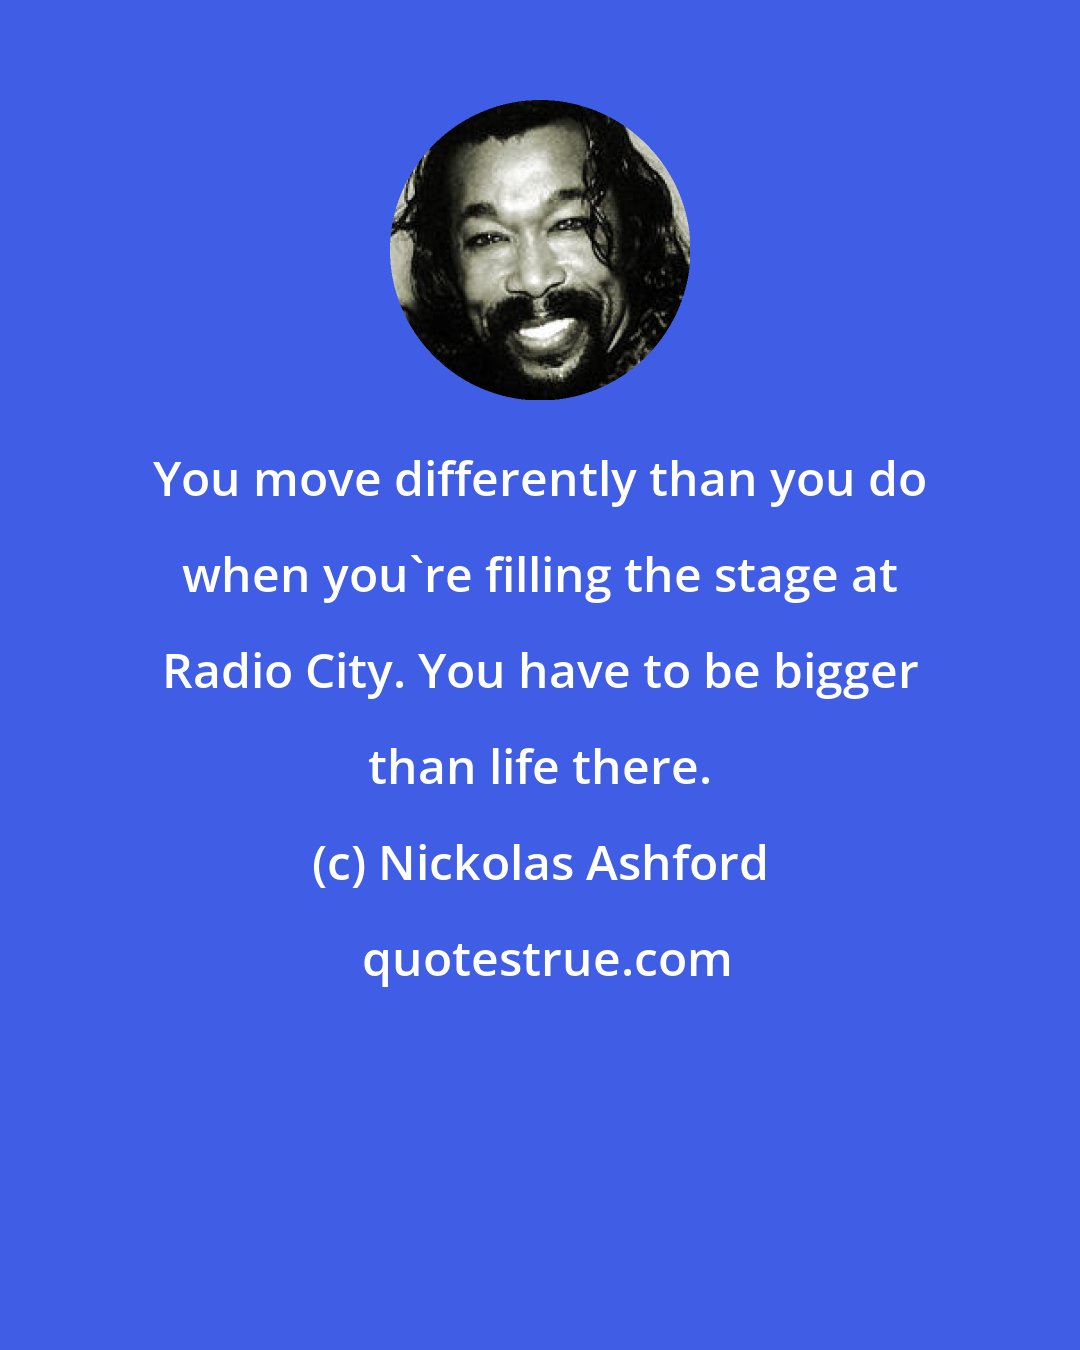 Nickolas Ashford: You move differently than you do when you're filling the stage at Radio City. You have to be bigger than life there.